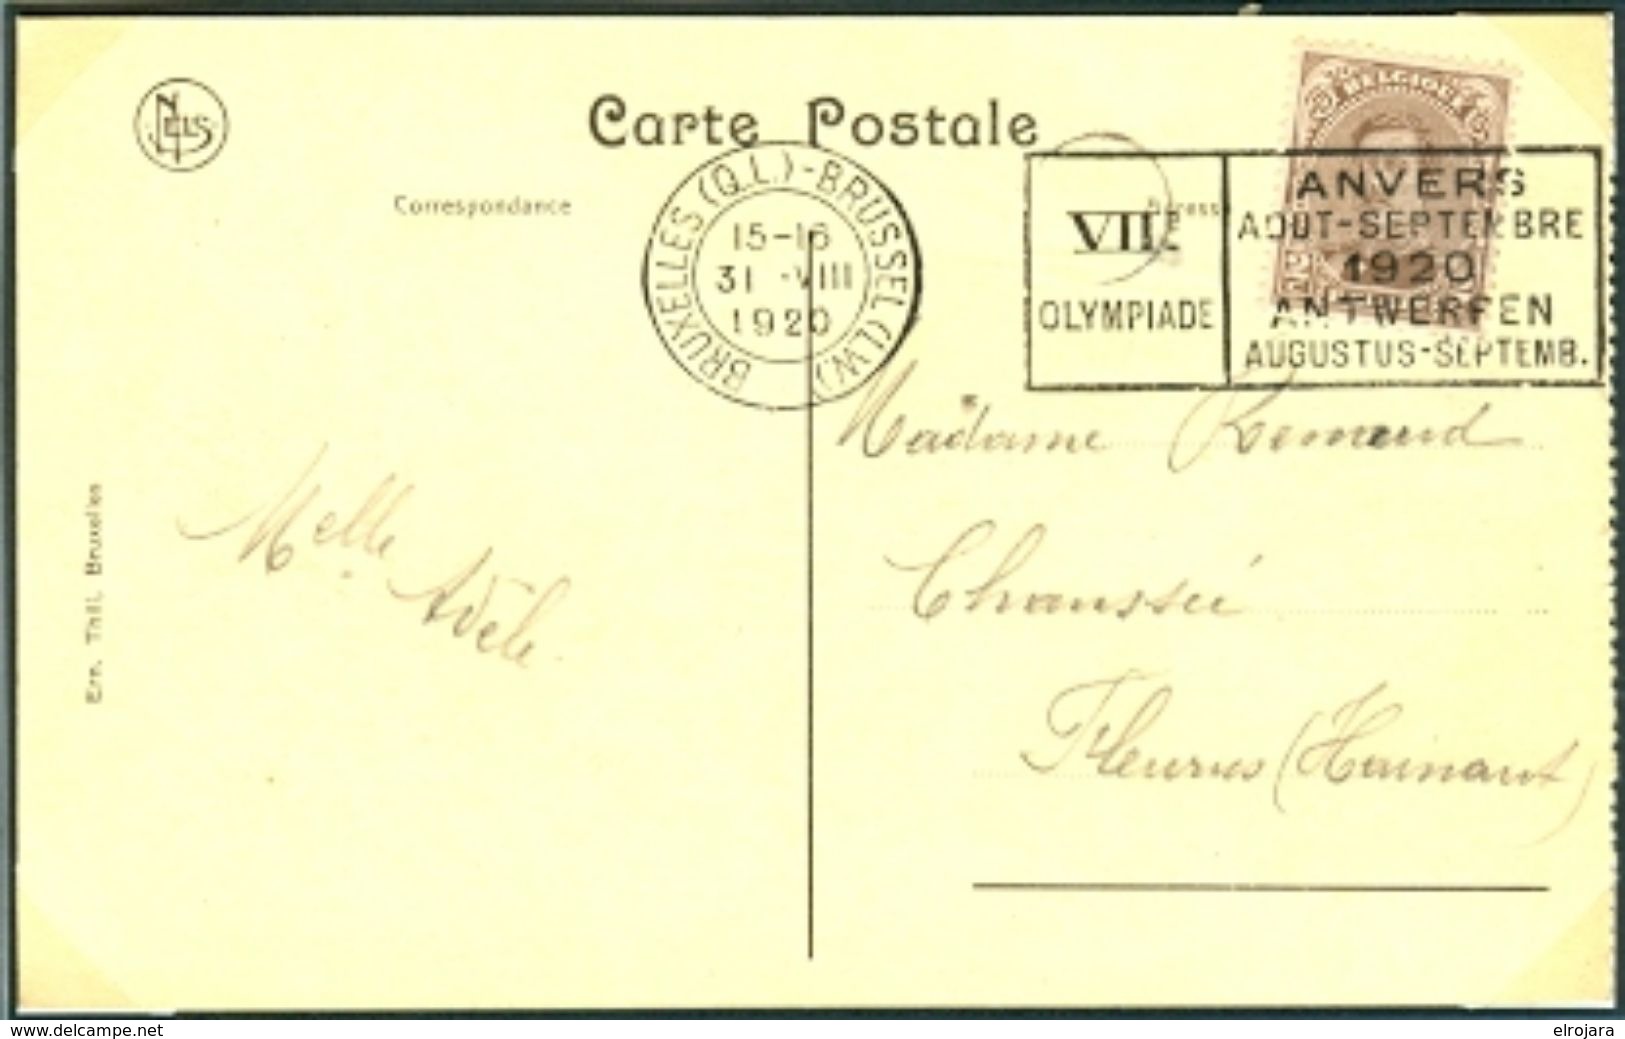 BELGIUM Postcard With Olympic Machine Cancel Bruxelles QL Brussel LW Dated 31-VIII 1920 Soccer Day - Sommer 1920: Antwerpen